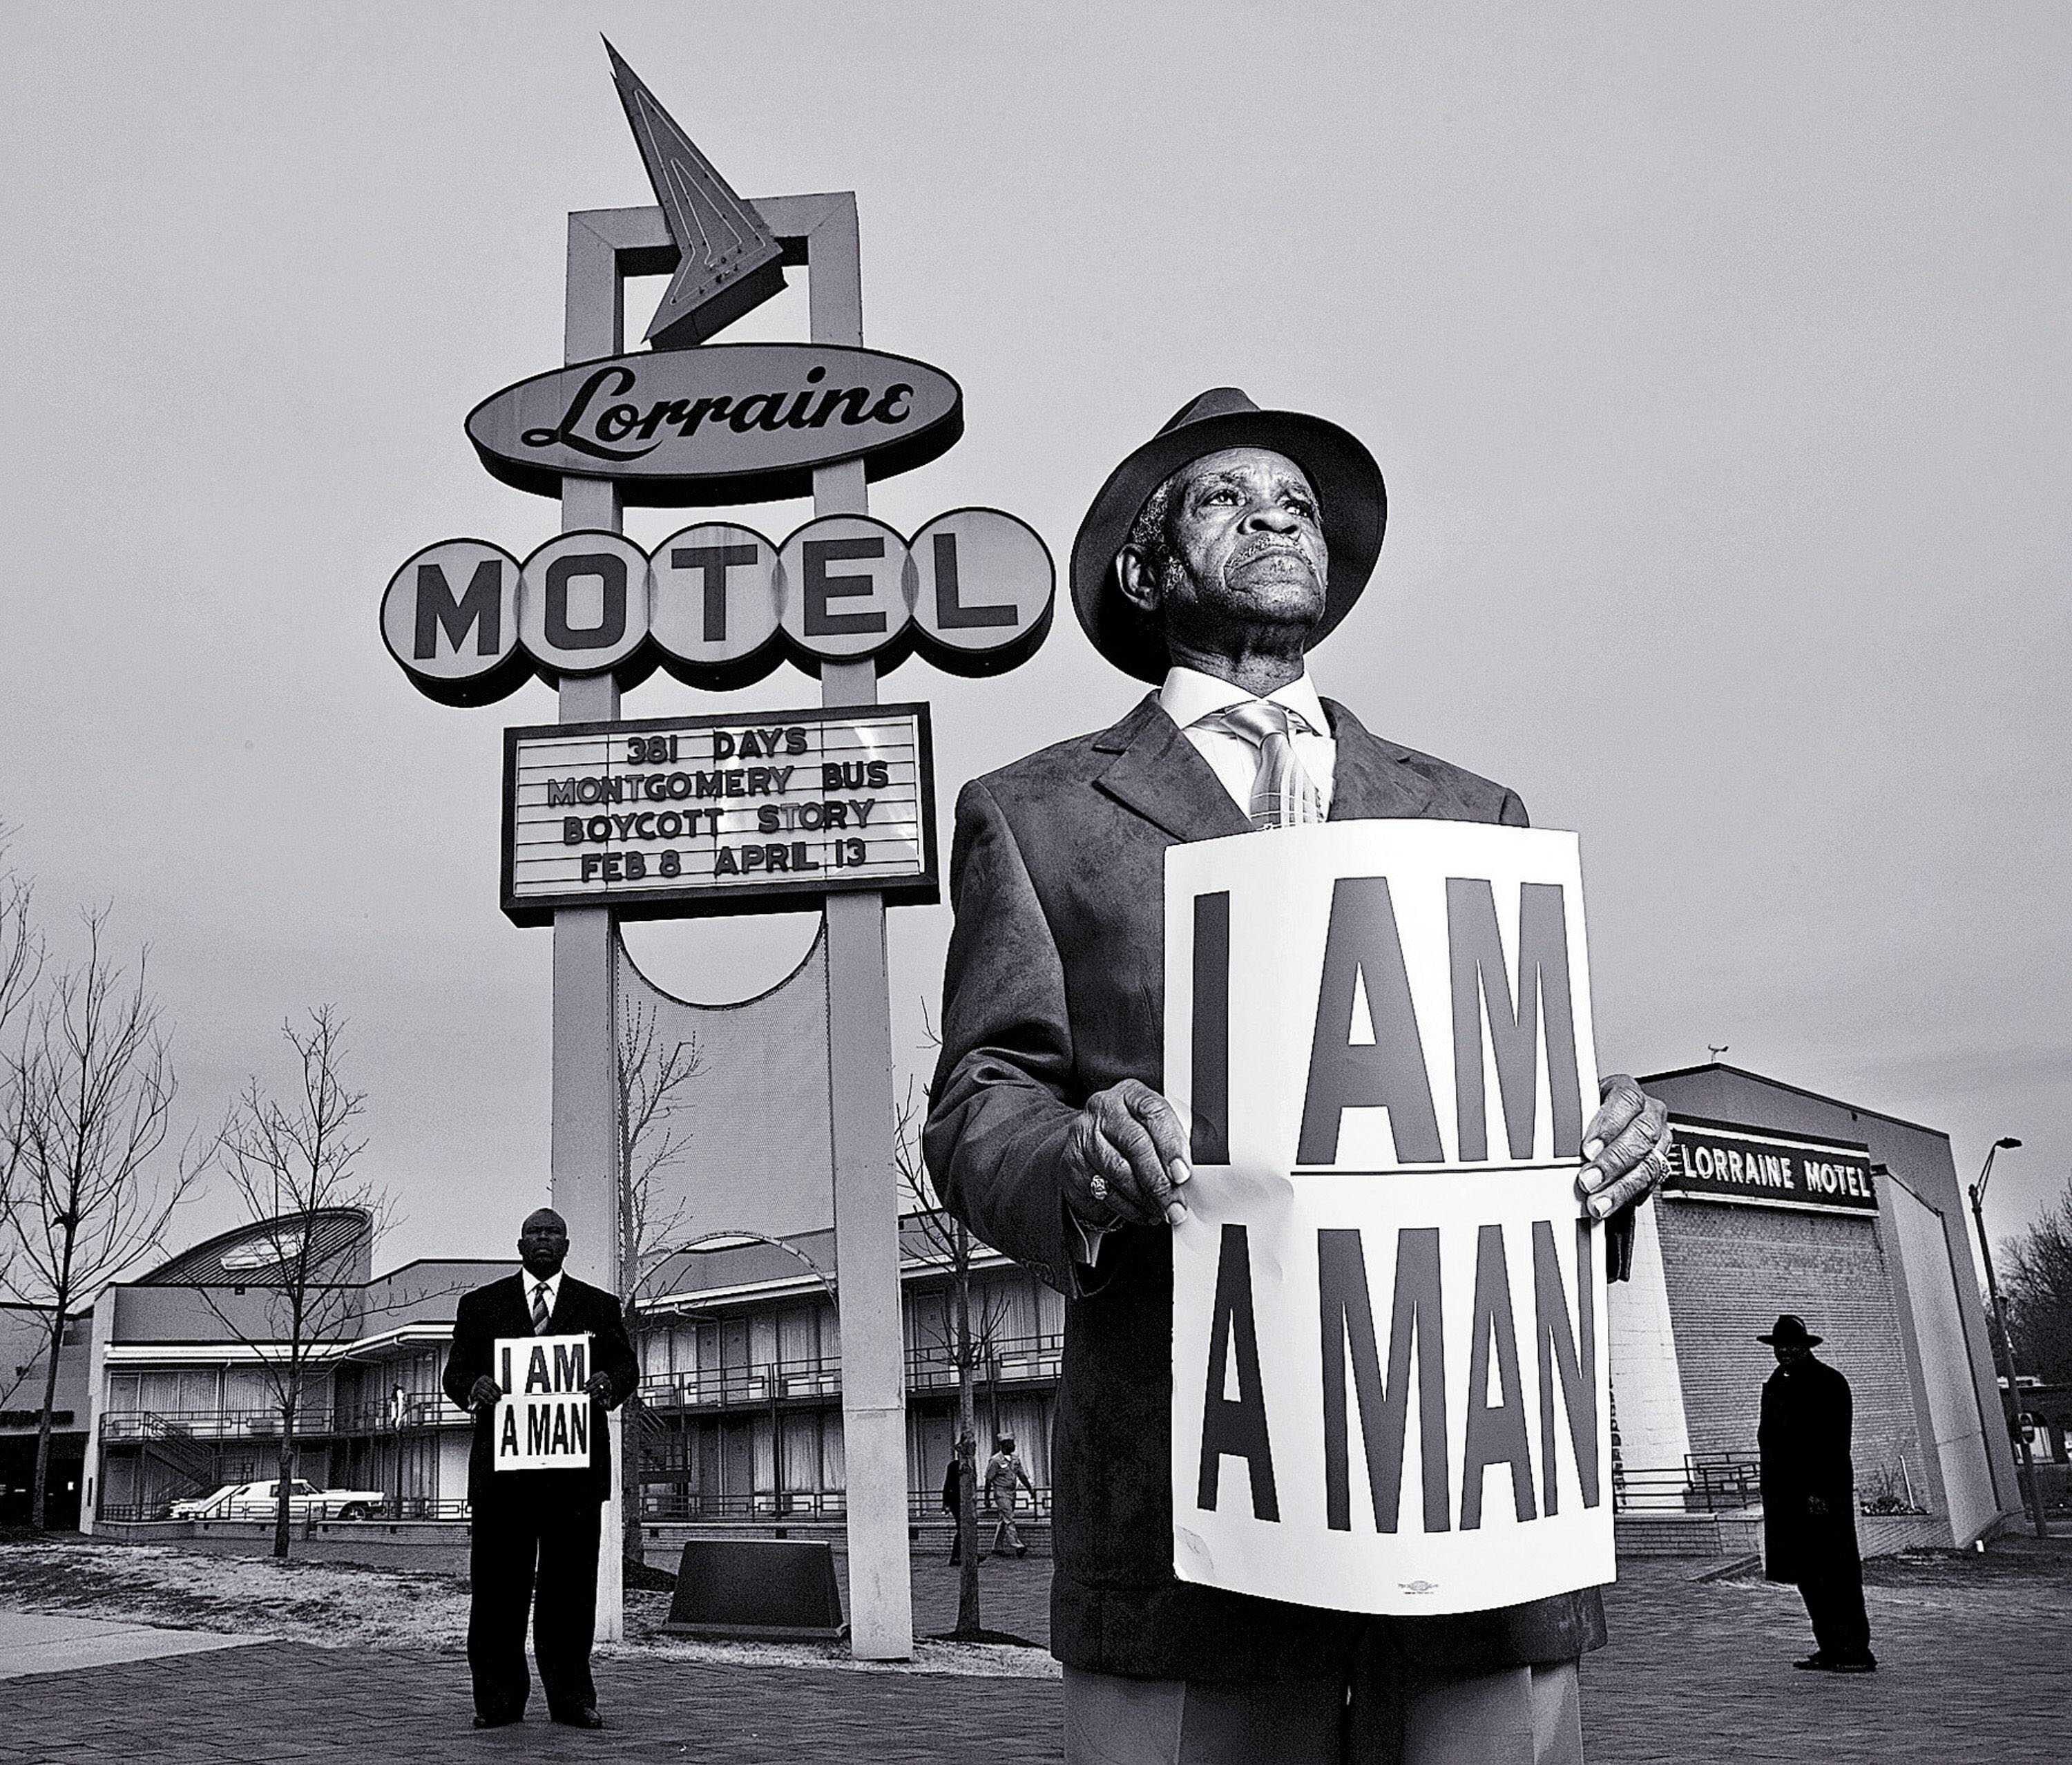 People hold signs that read "I Am A Man" outside Lorraine Motel in Memphis Tennessee.